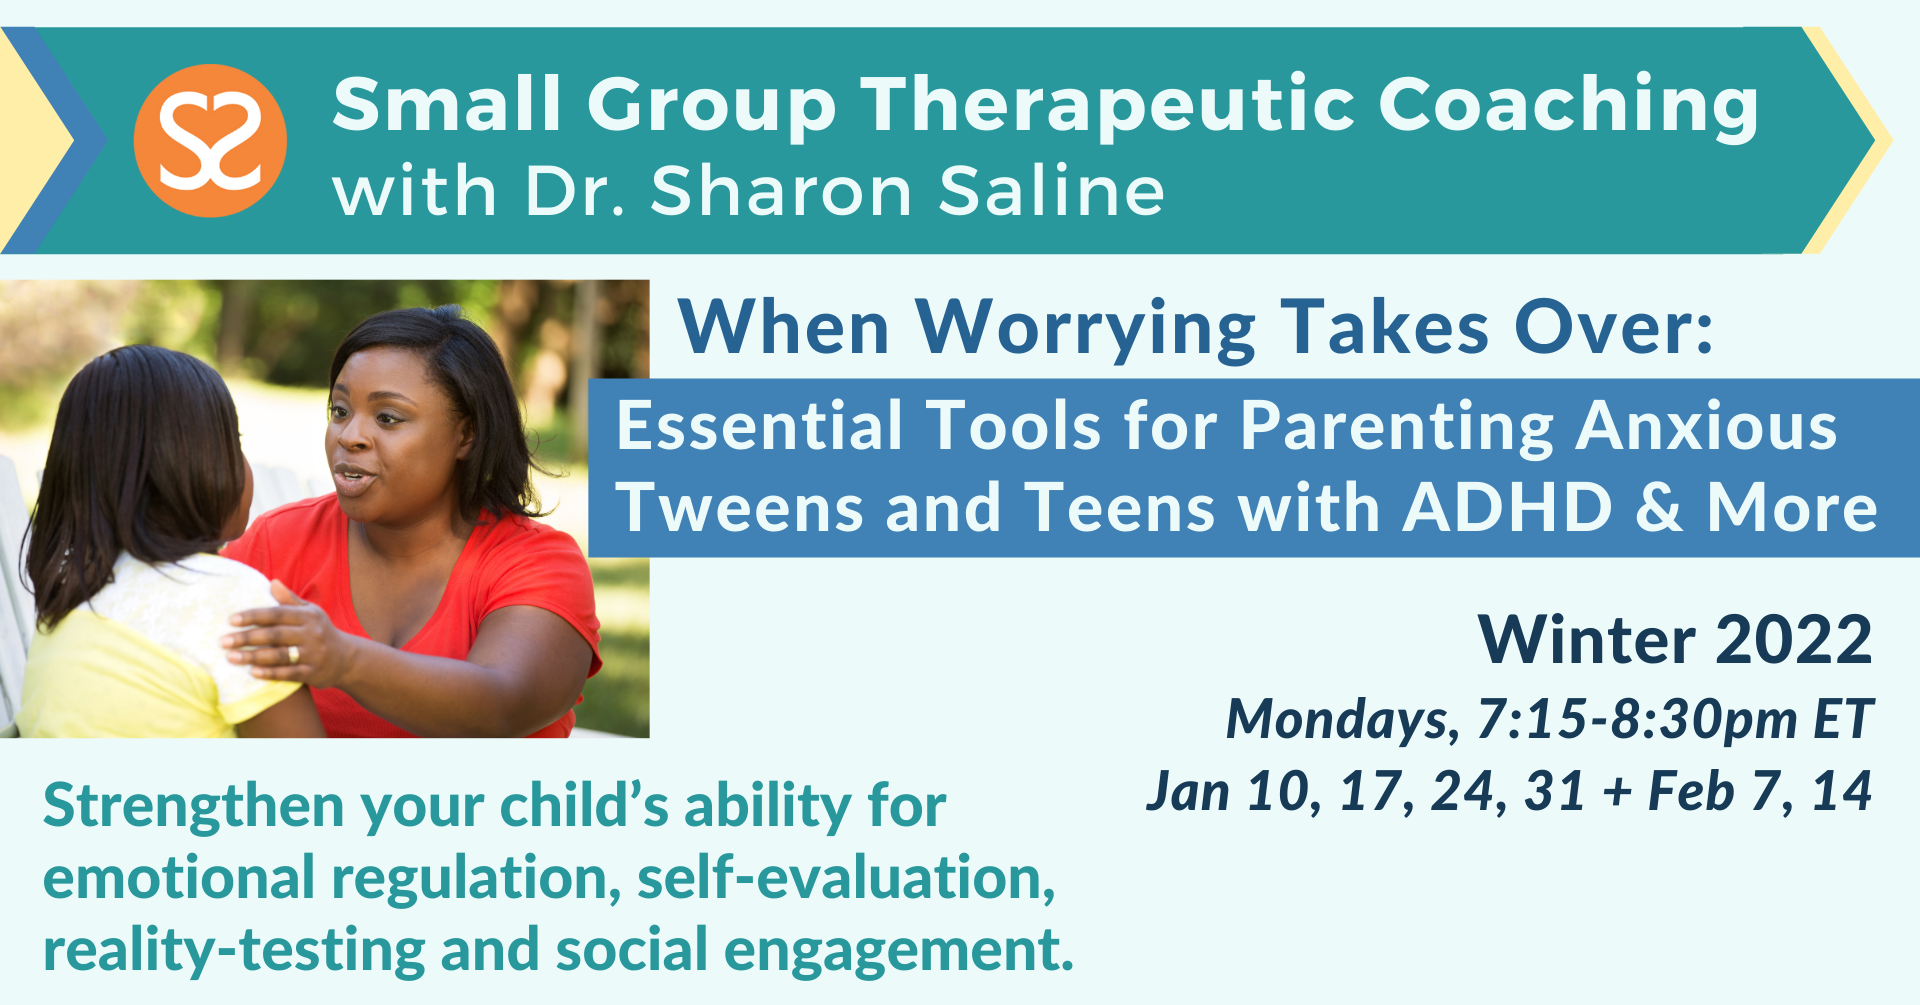 Winter 2022 Small Group Coaching with Dr. Saline: When Worrying Takes Over